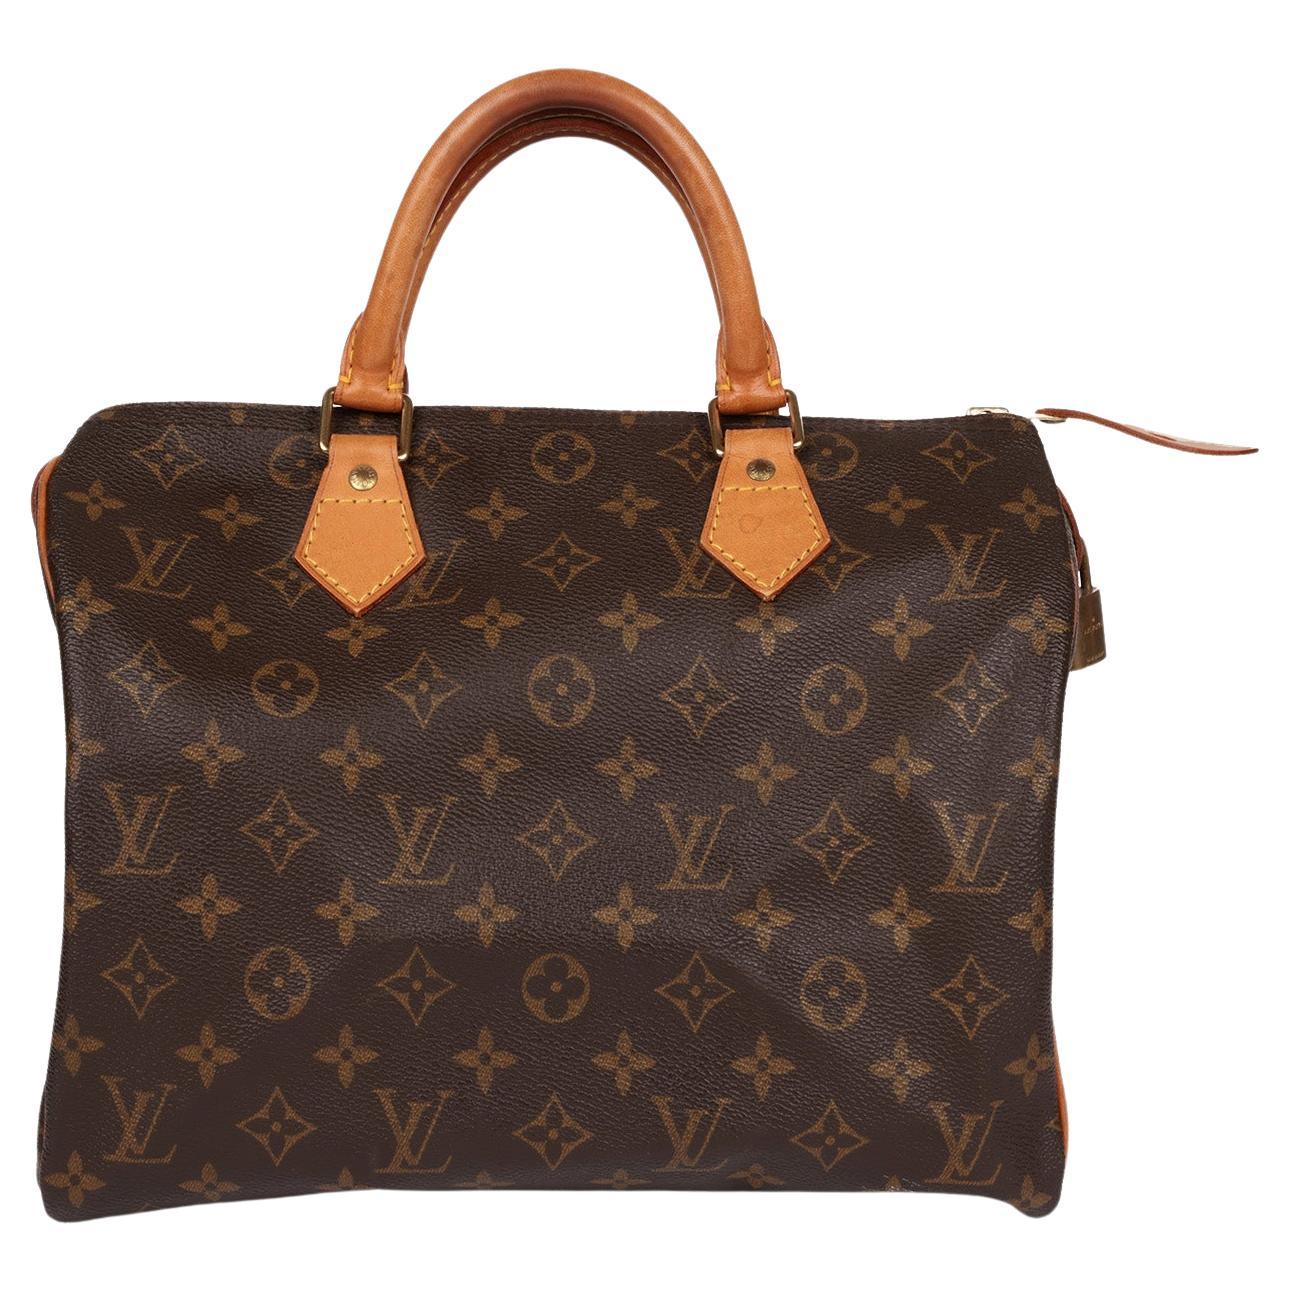 What color is the Louis Vuitton box?